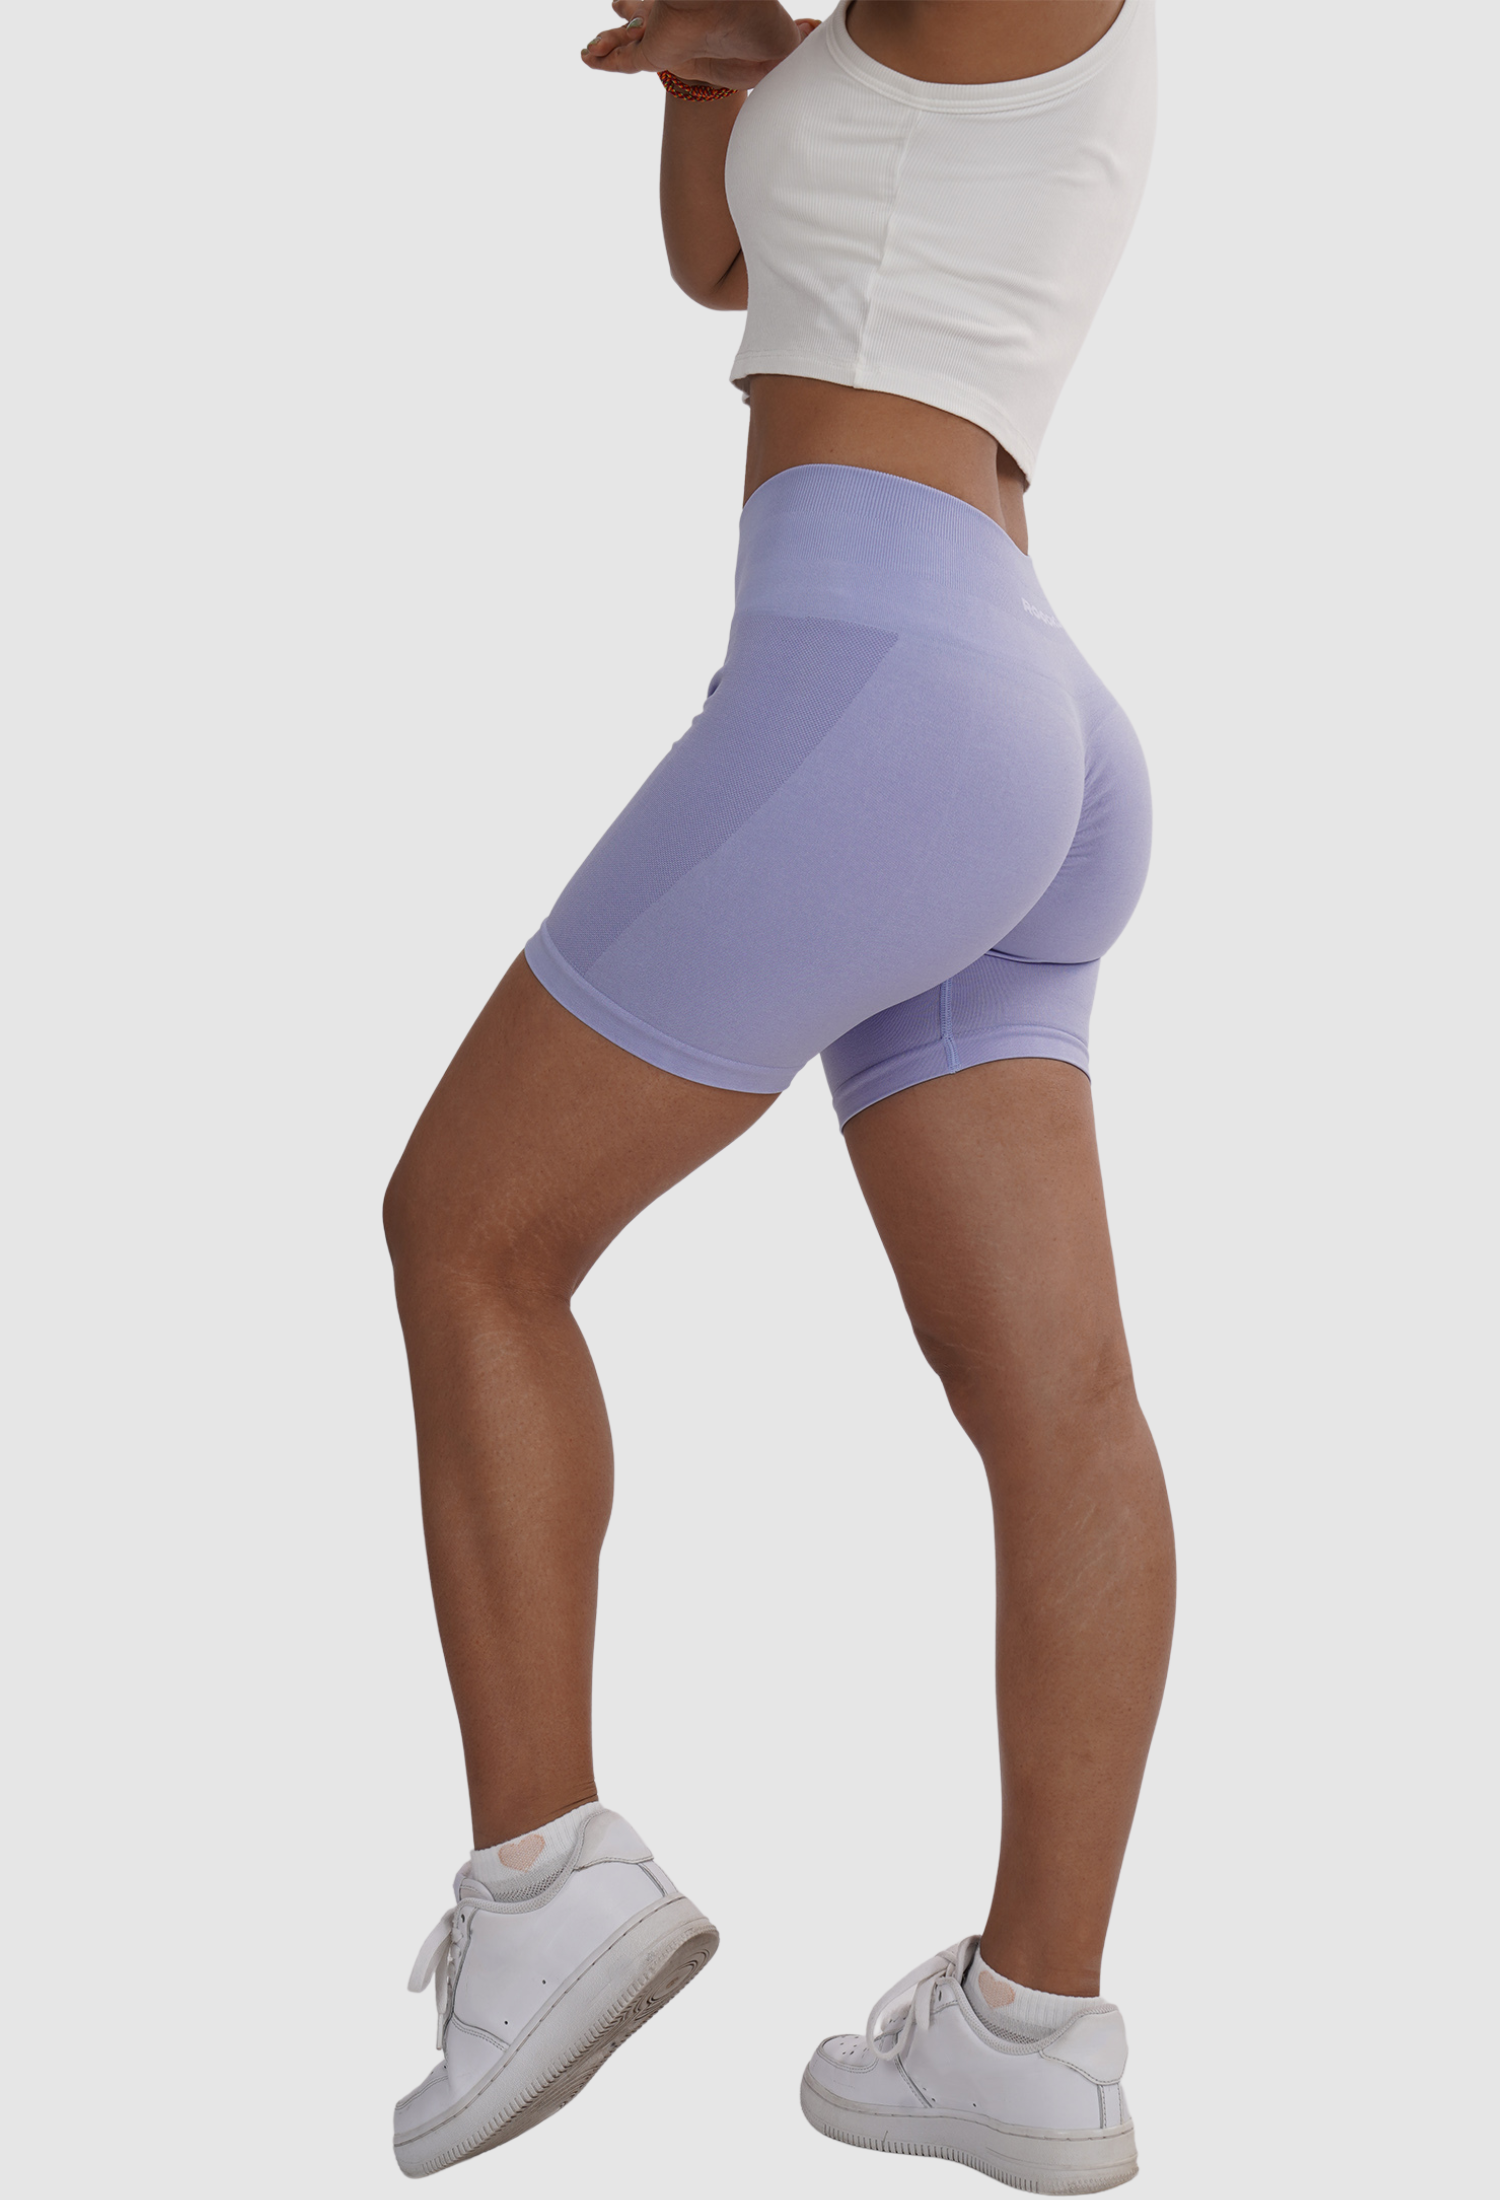 Women's Shorts Cargo Shorts Women Gym Shorts Scrunch Butt Booty Tight  Workout Shorts For Women Fitness Sexy Drawstring Yoga Shorts With Pocket  230616